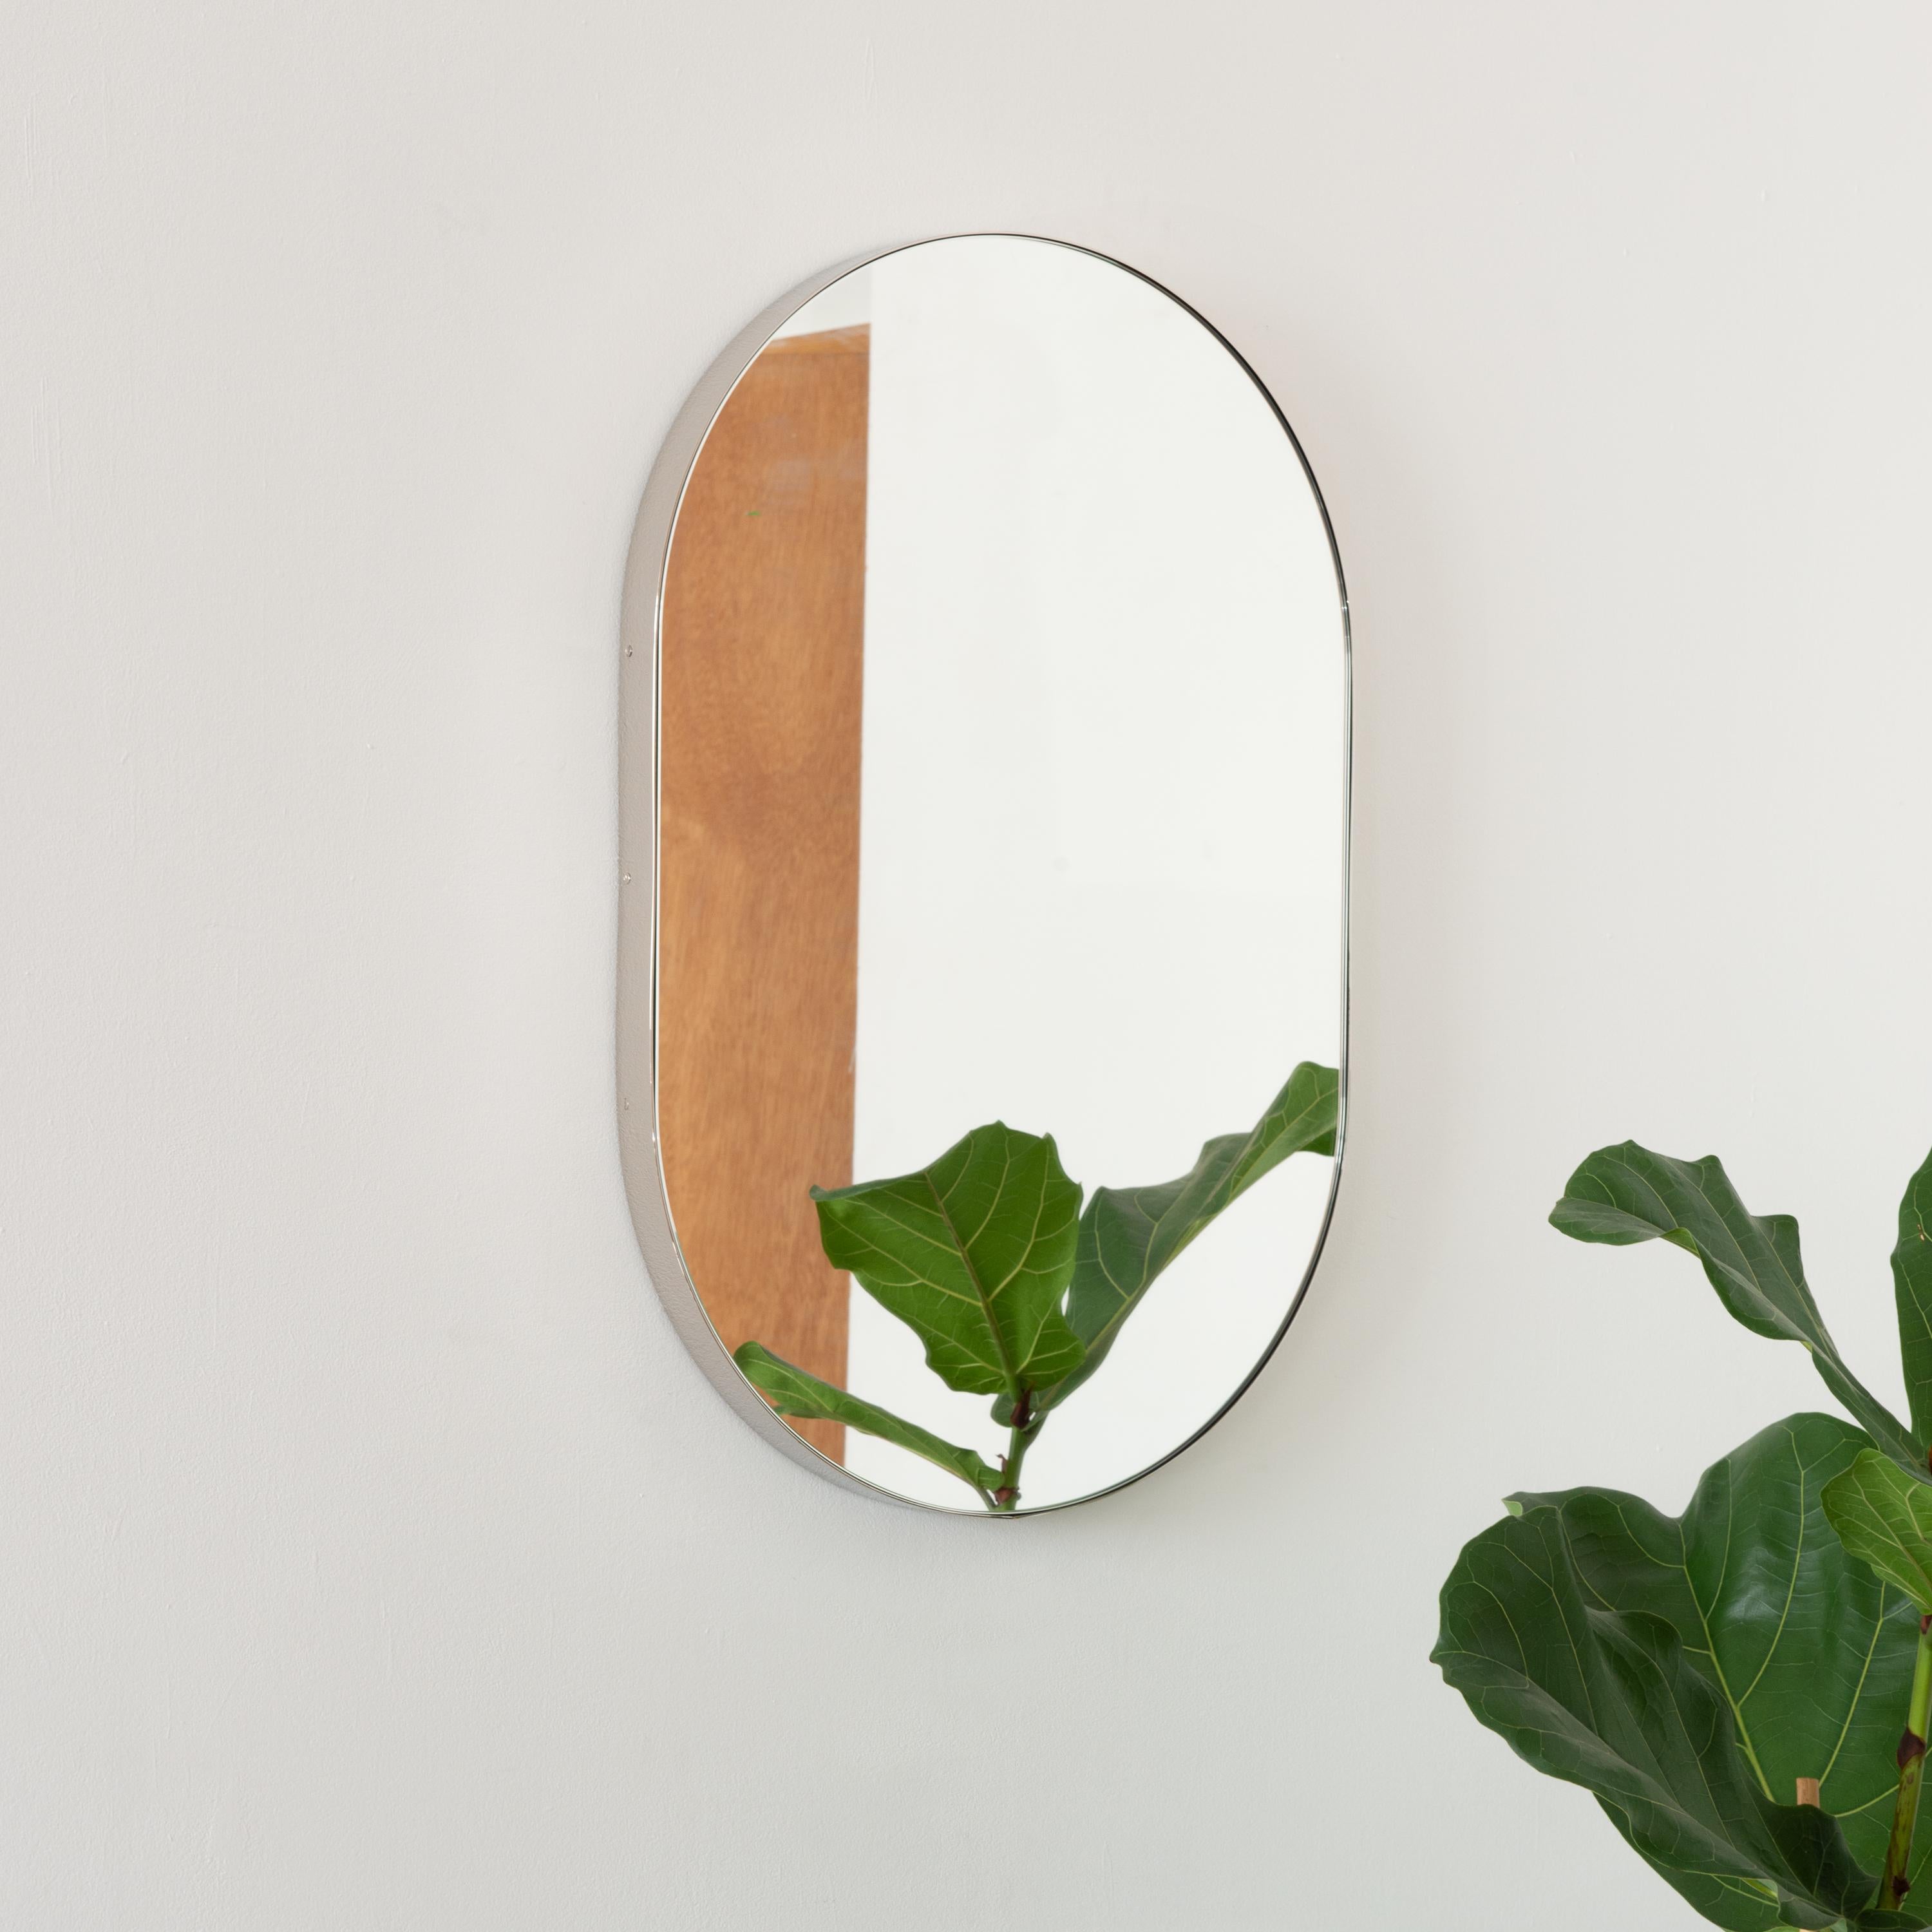 Delightful capsule shaped mirror with an elegant nickel plated frame. Designed and handcrafted in London, UK.

Our mirrors are designed with an integrated French cleat (split batten) system that ensures the mirror is securely mounted flush with the